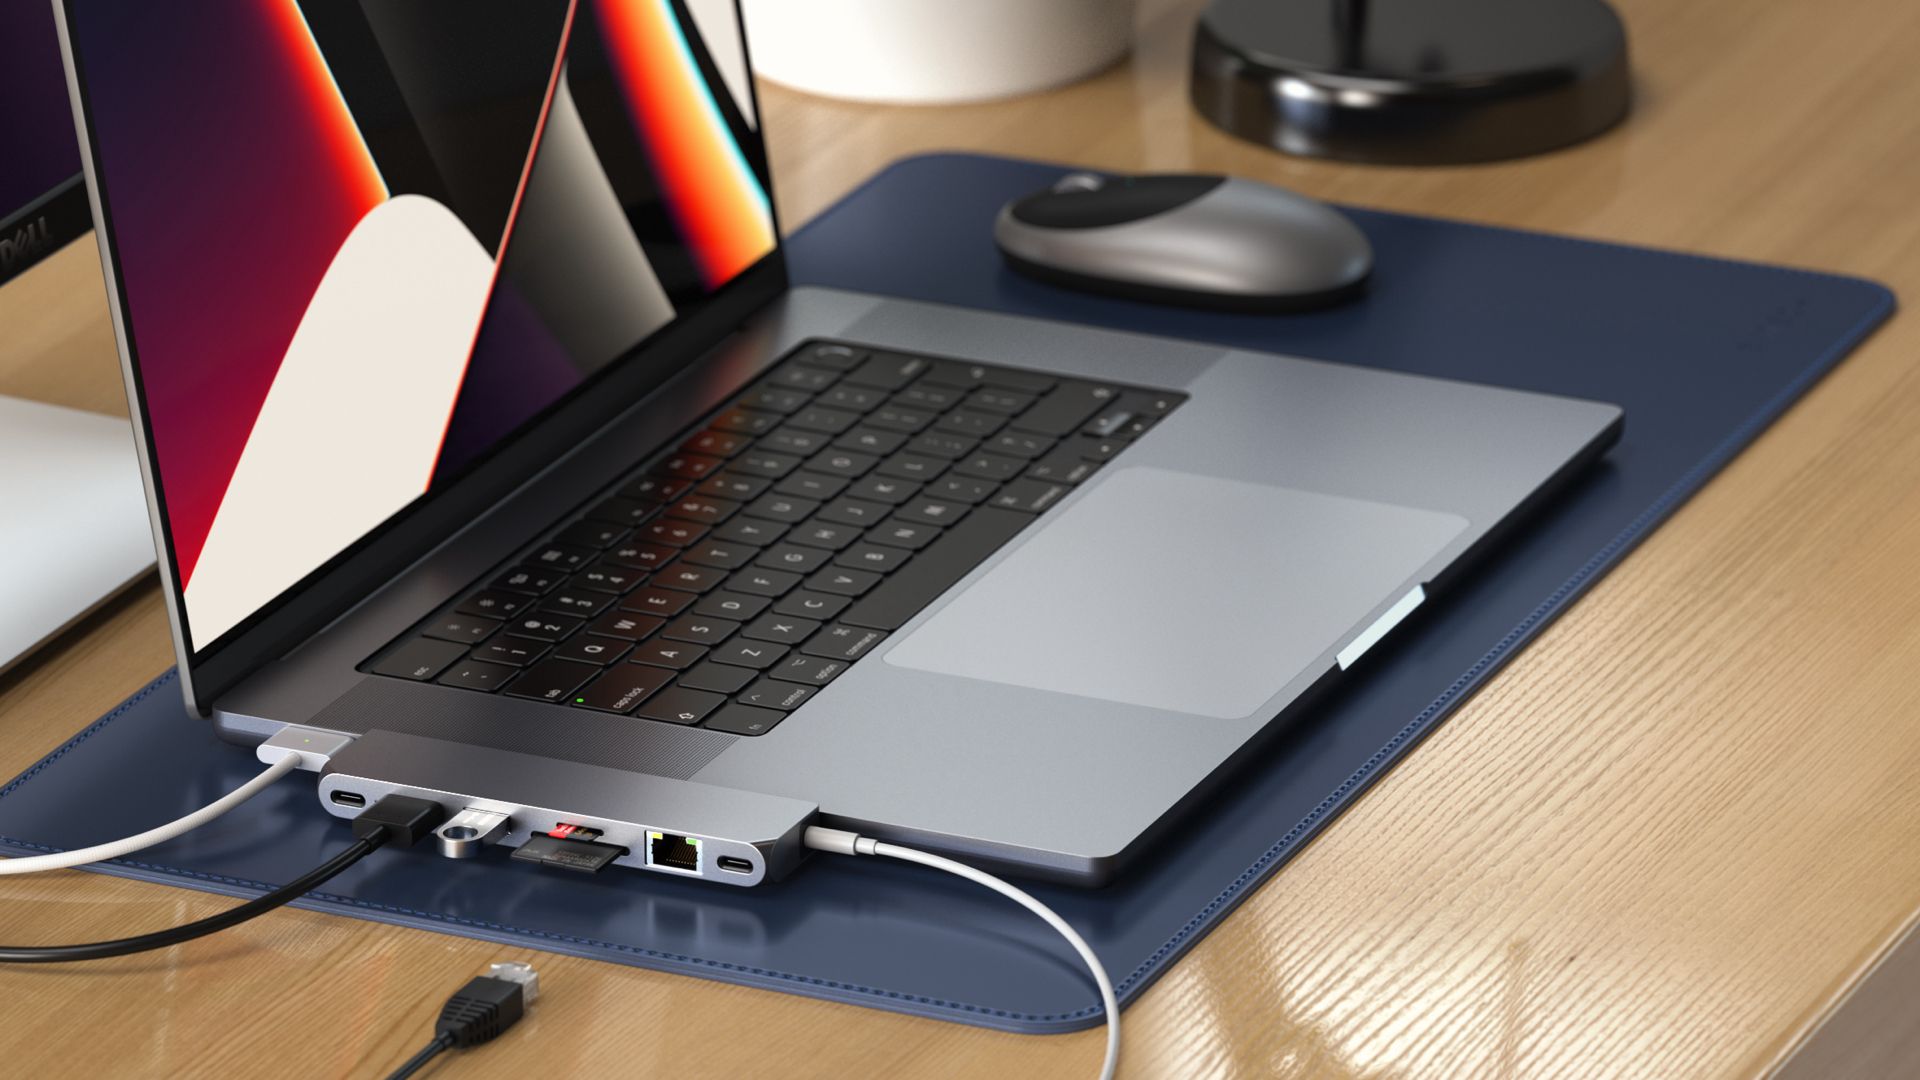 Satechi Pro Hub Max dongle for MacBook